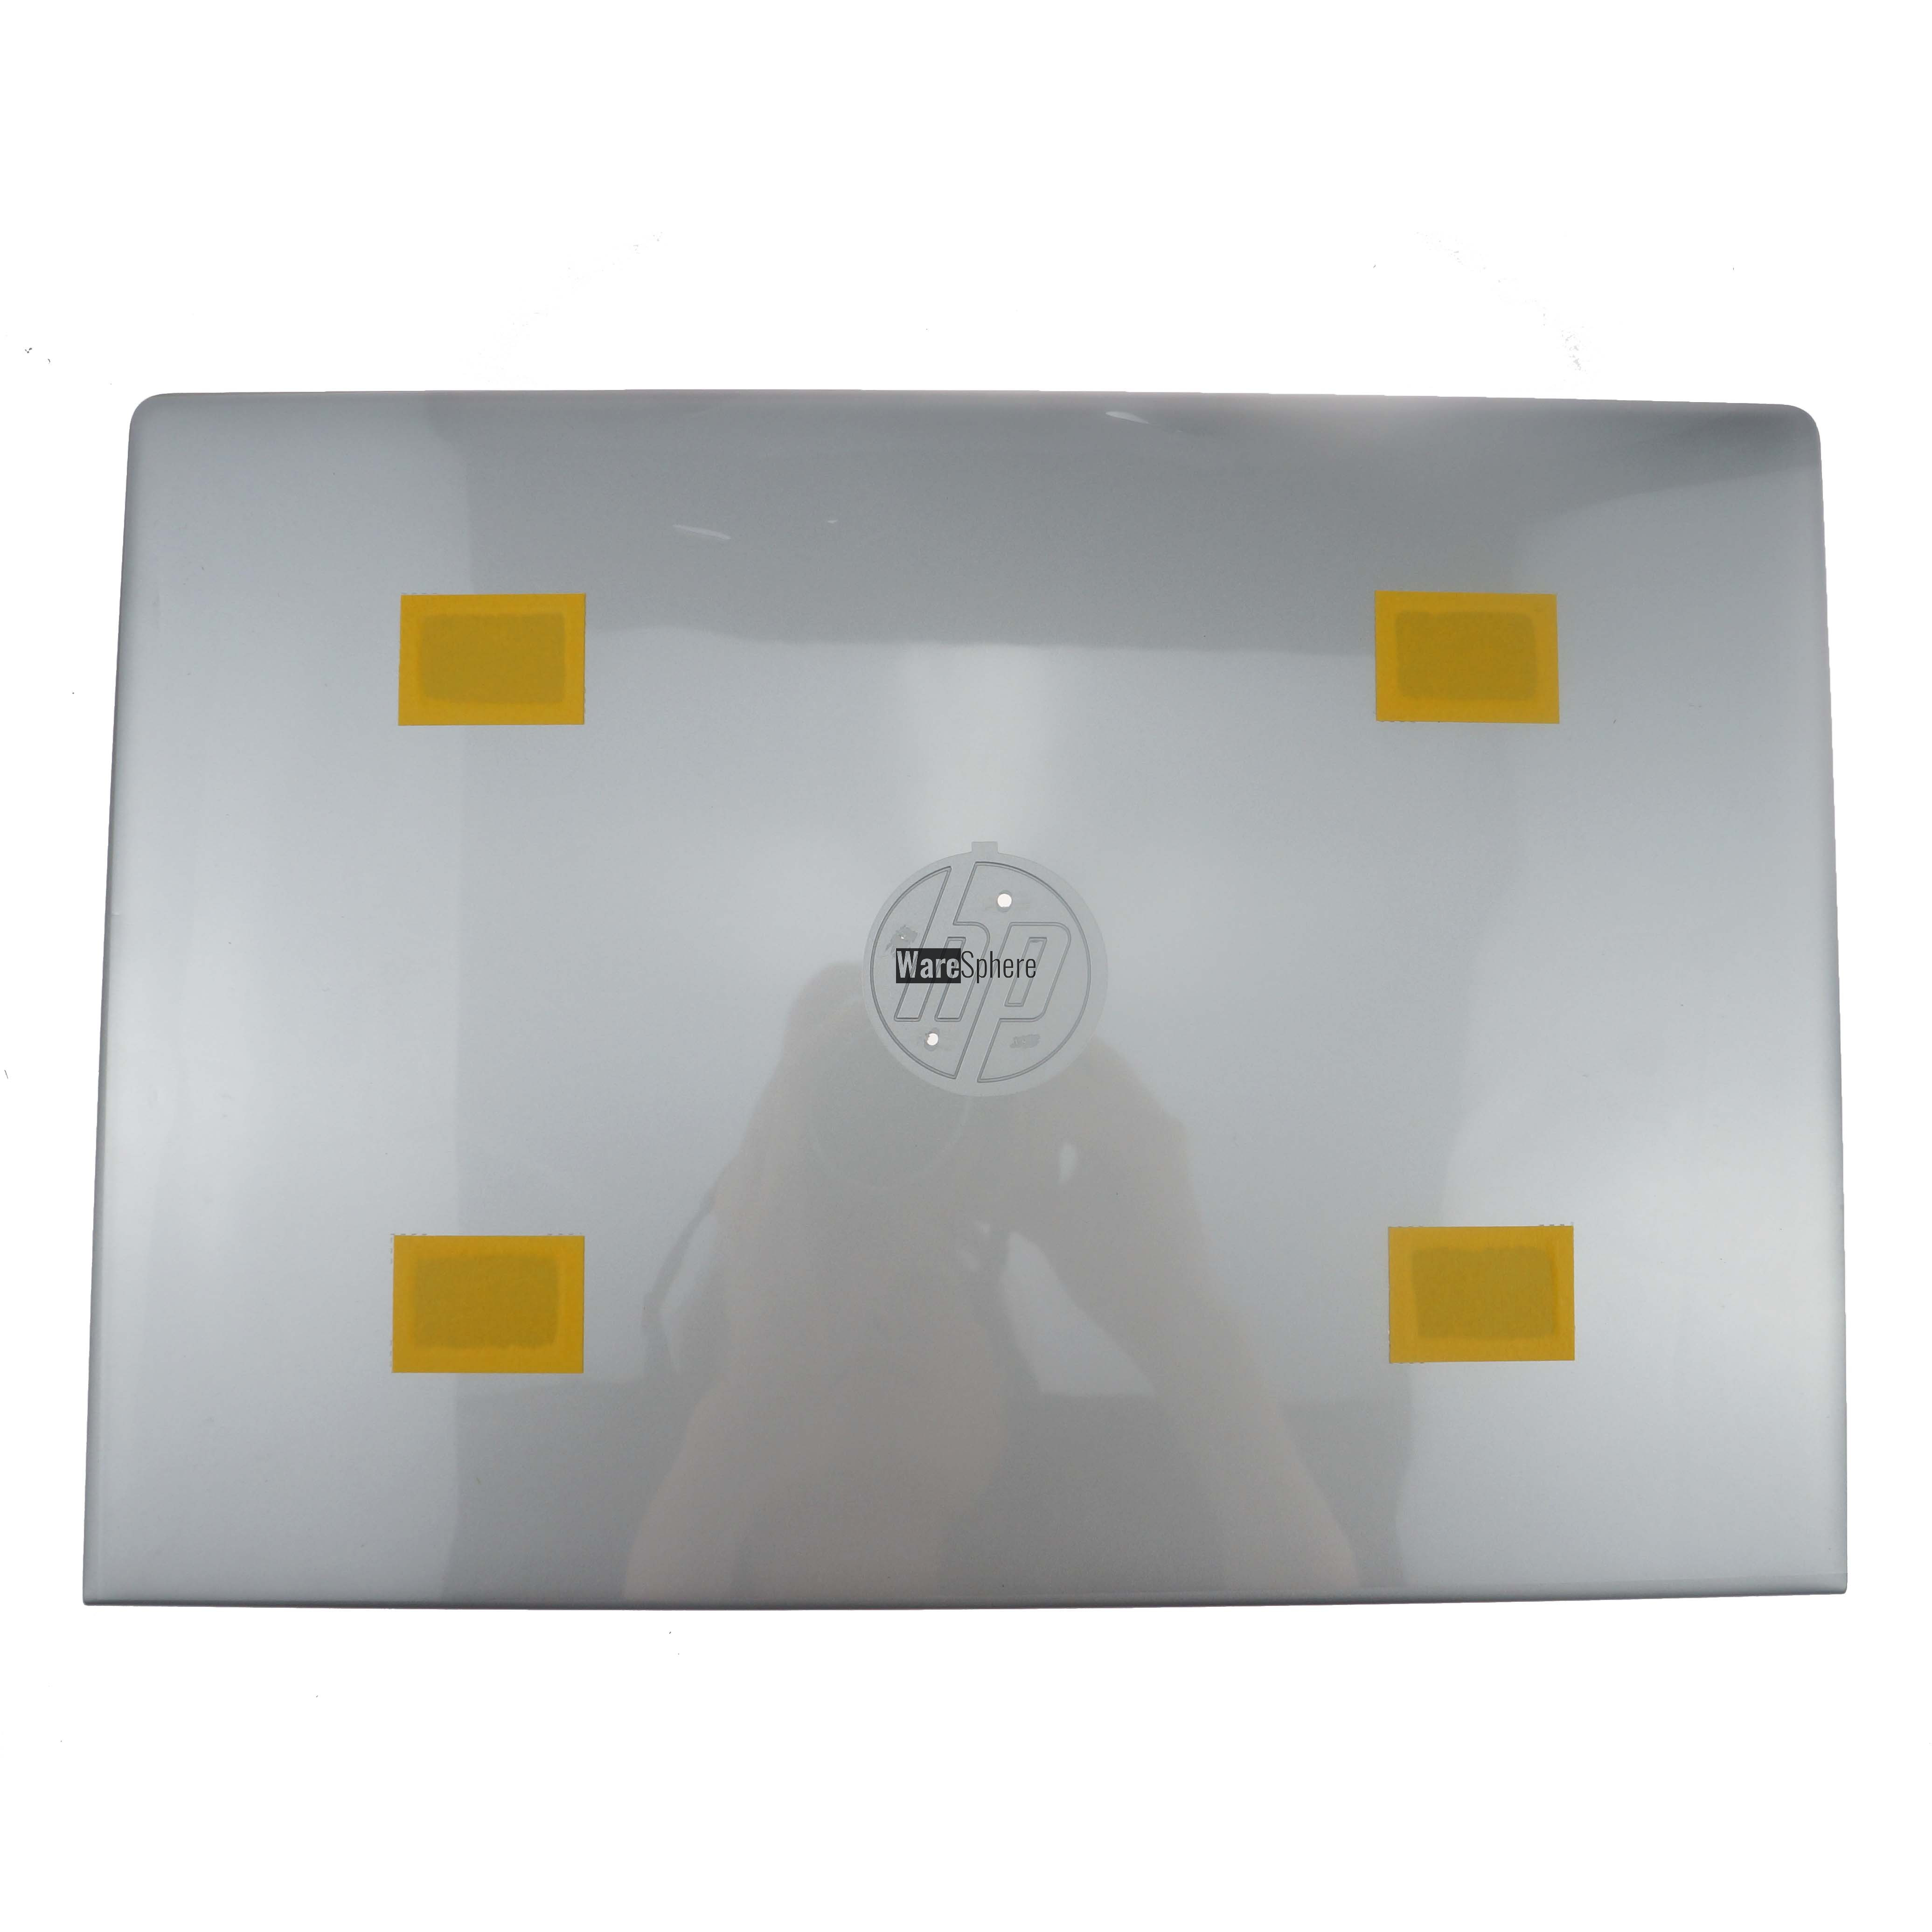 LCD Back Cover for HP Probook 640 G4 Nontouch L09526-001 6070B1230301 Sliver